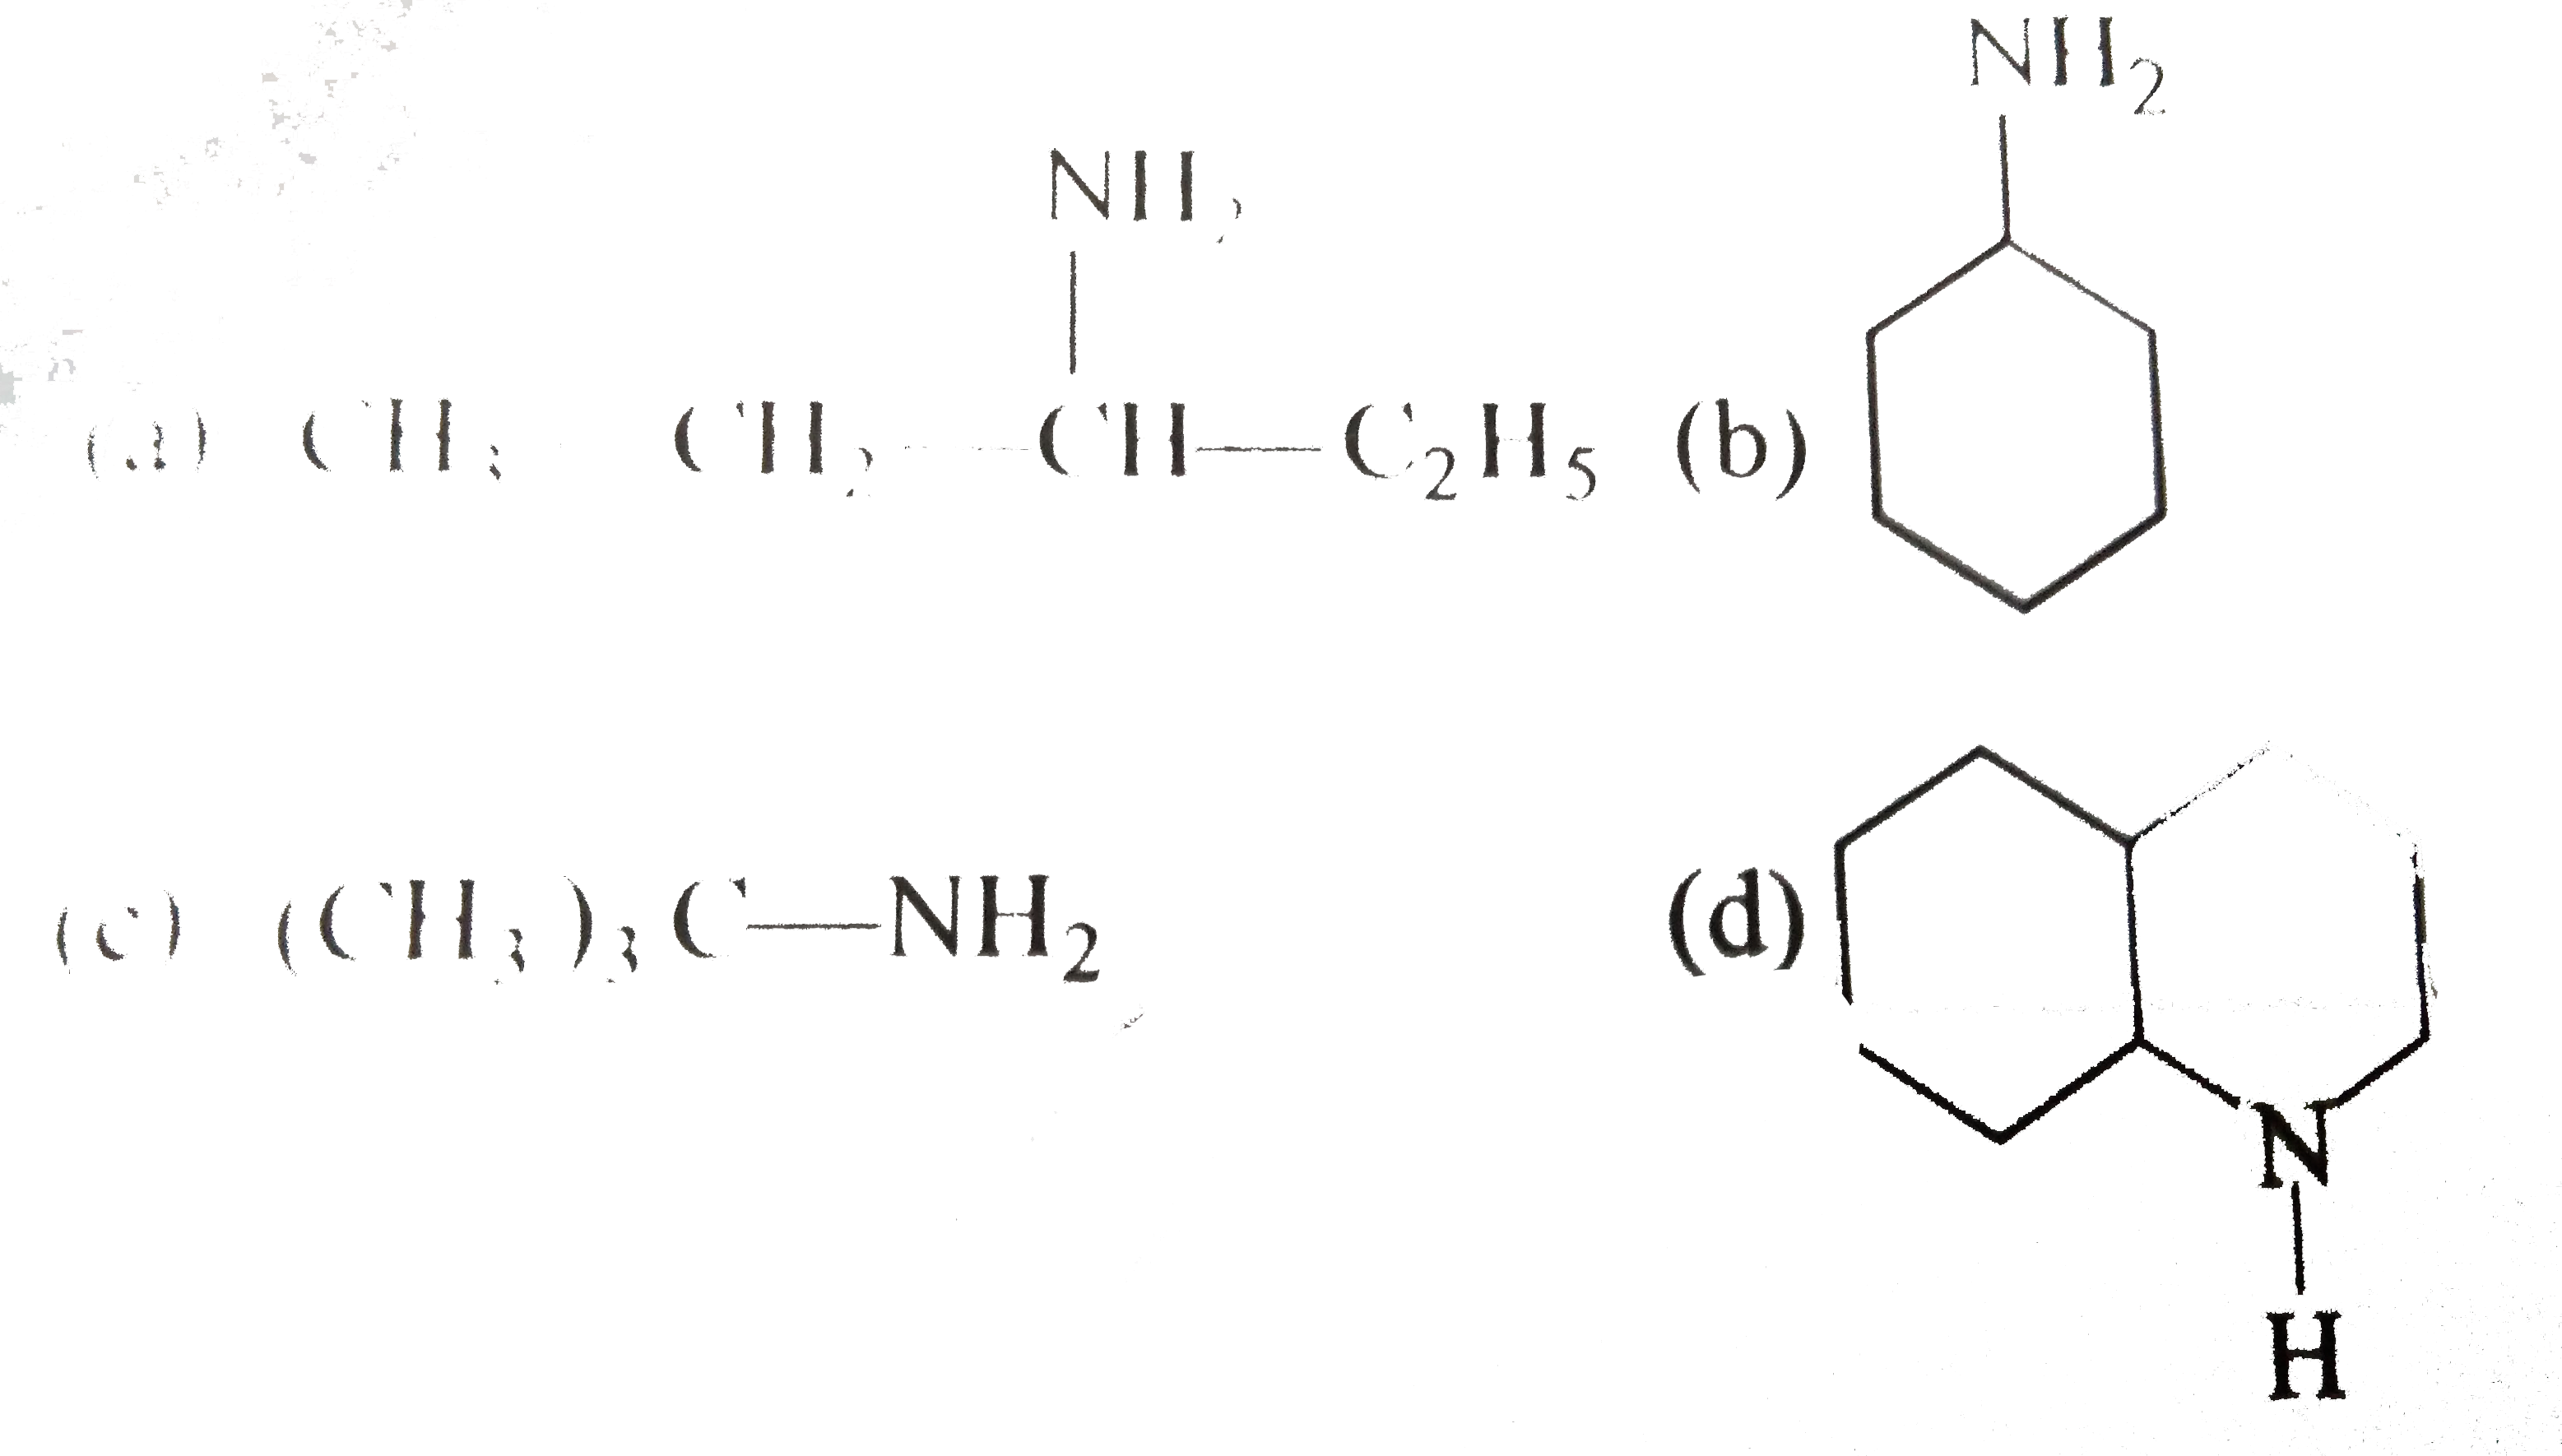 Select the starting substance and reagent for synthesis of following amines: